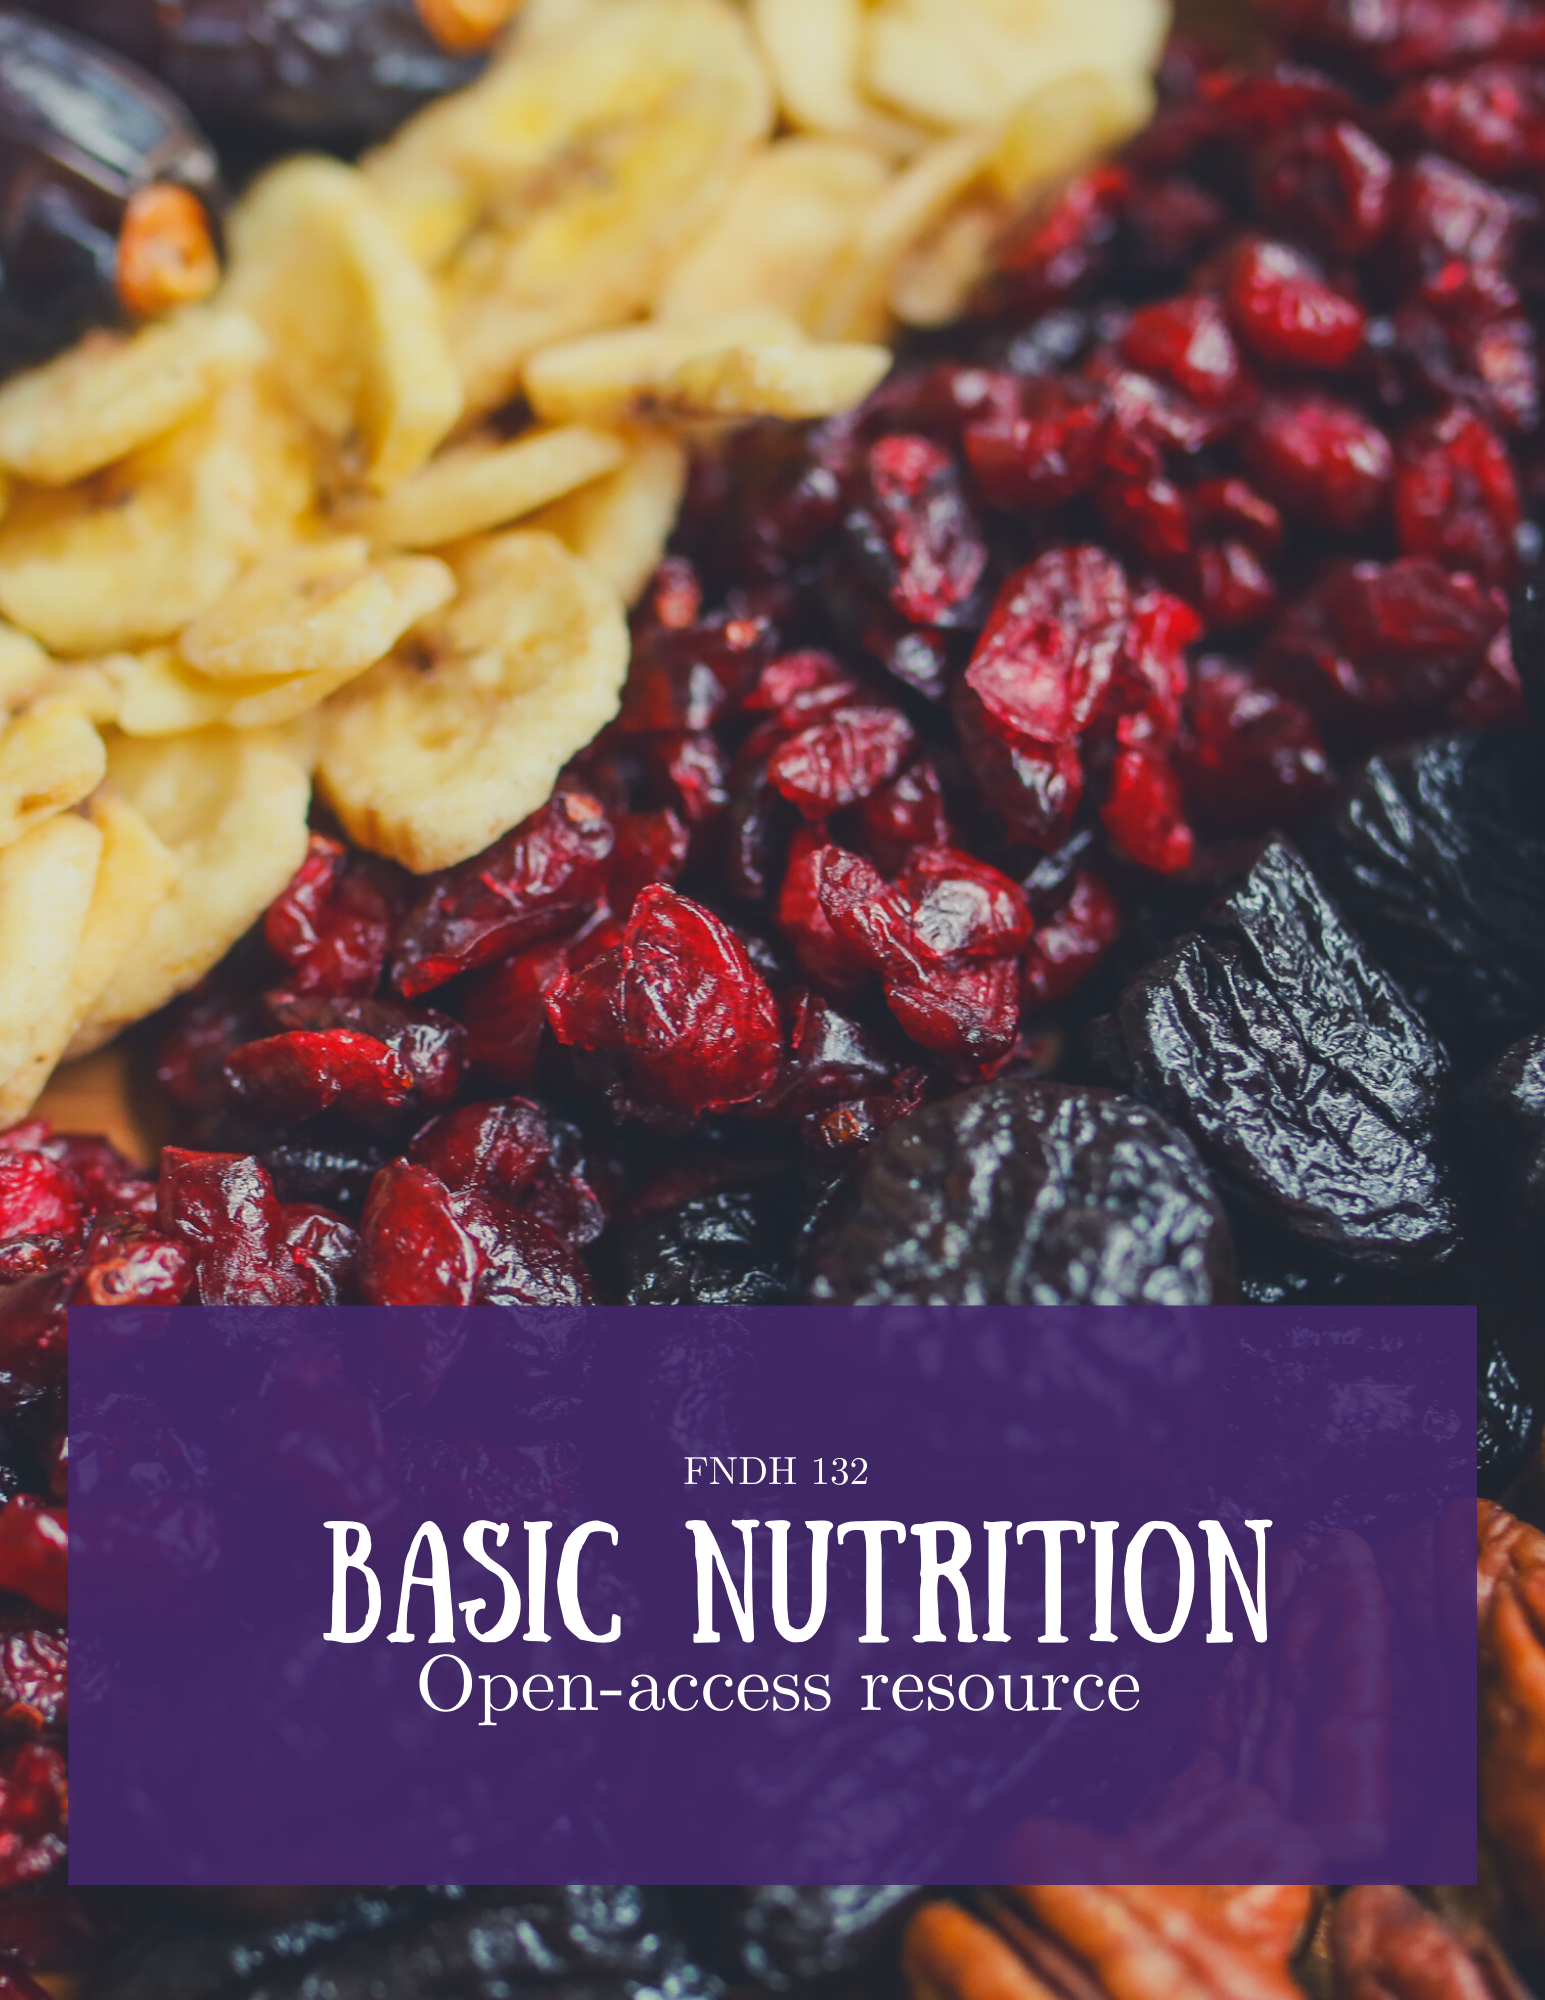 FNDH 132 Basic Nutrition's Open-Access Resource